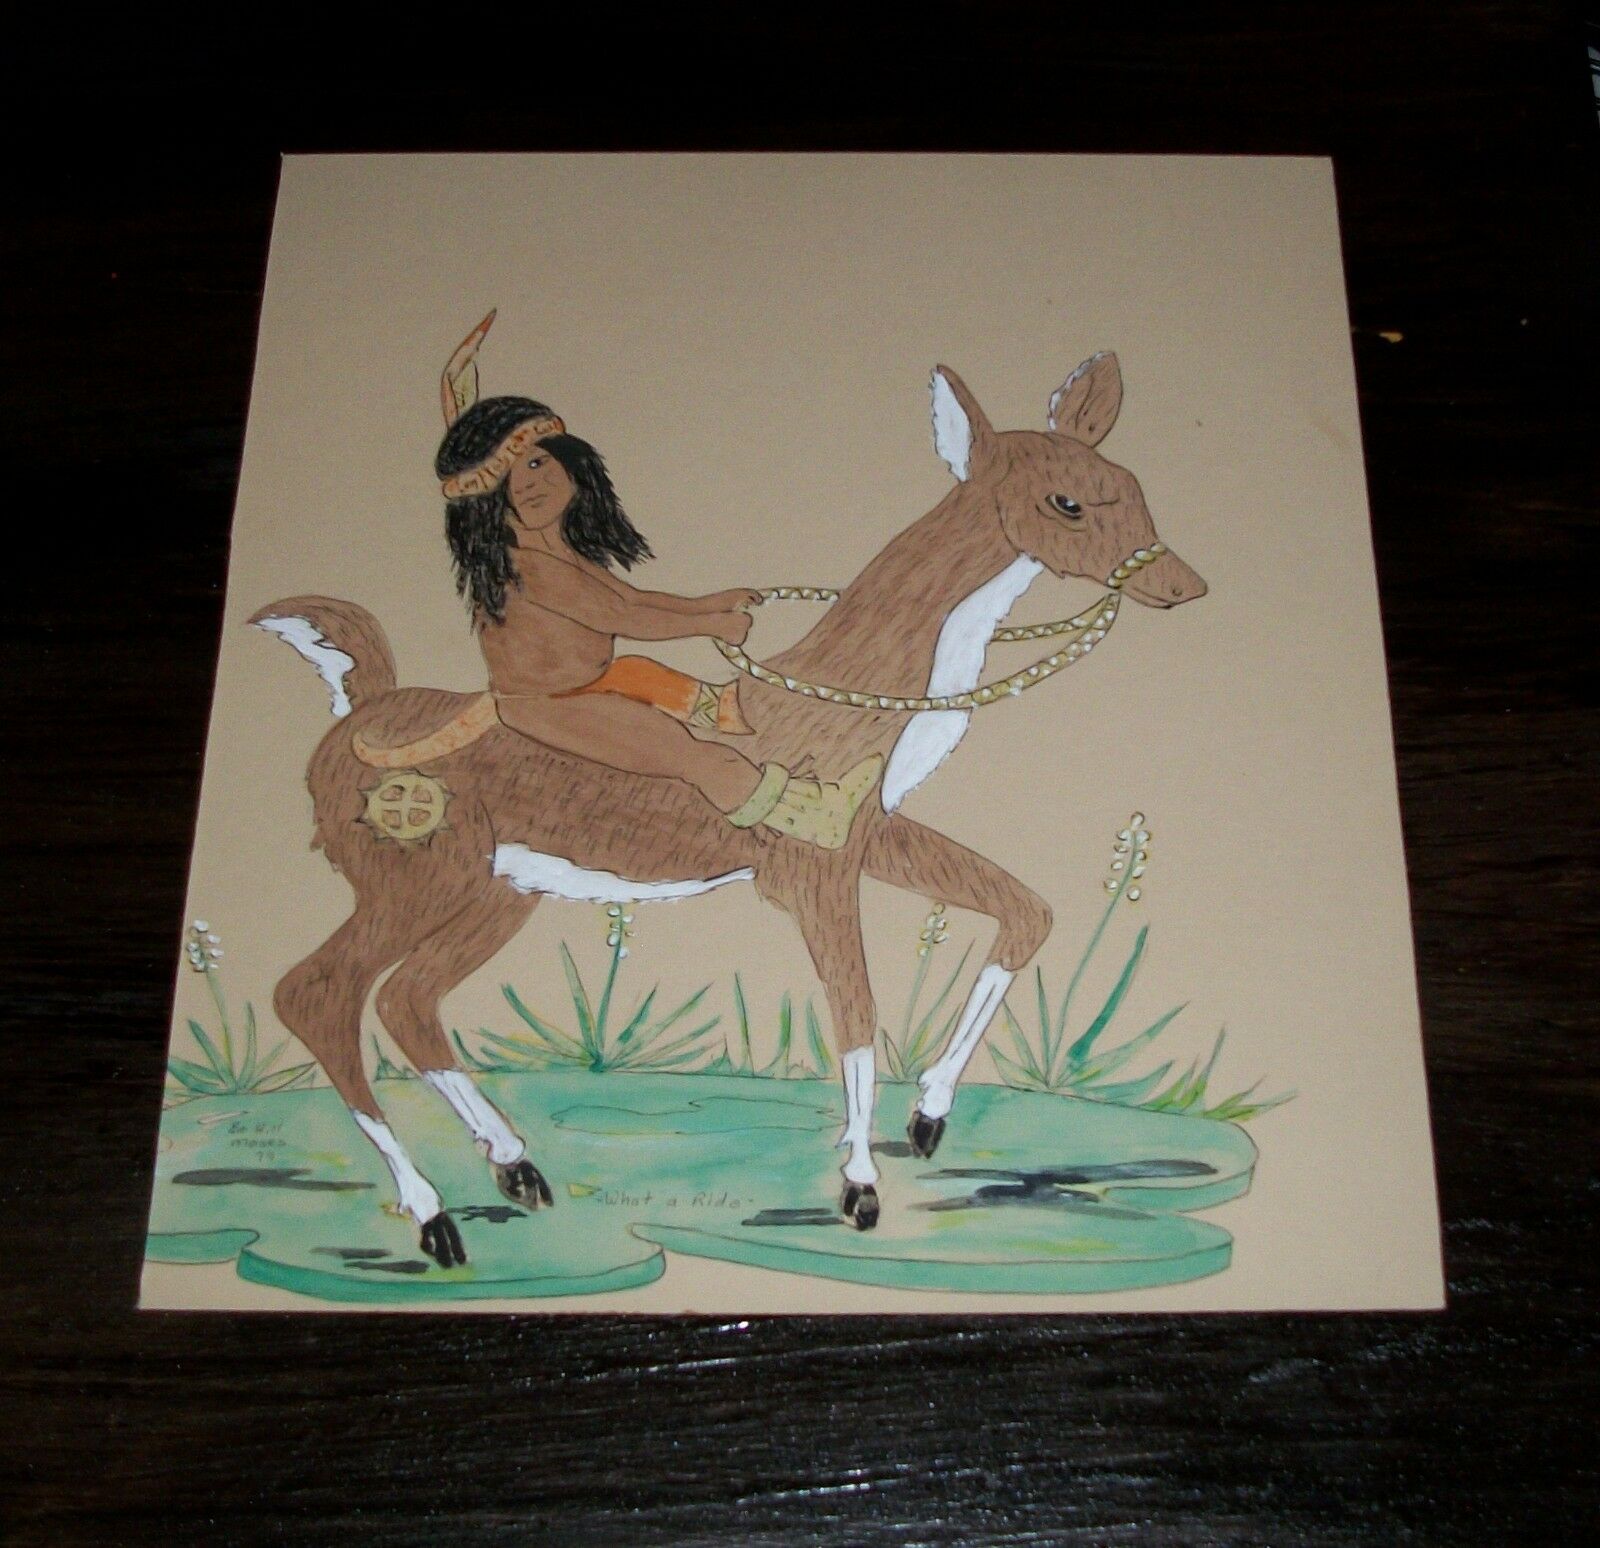 Primary image for BO HILL MOSES NATIVE AMERICAN INDIAN BOY RIDES DEER SOUTHWEST DECOR ART PAINTING